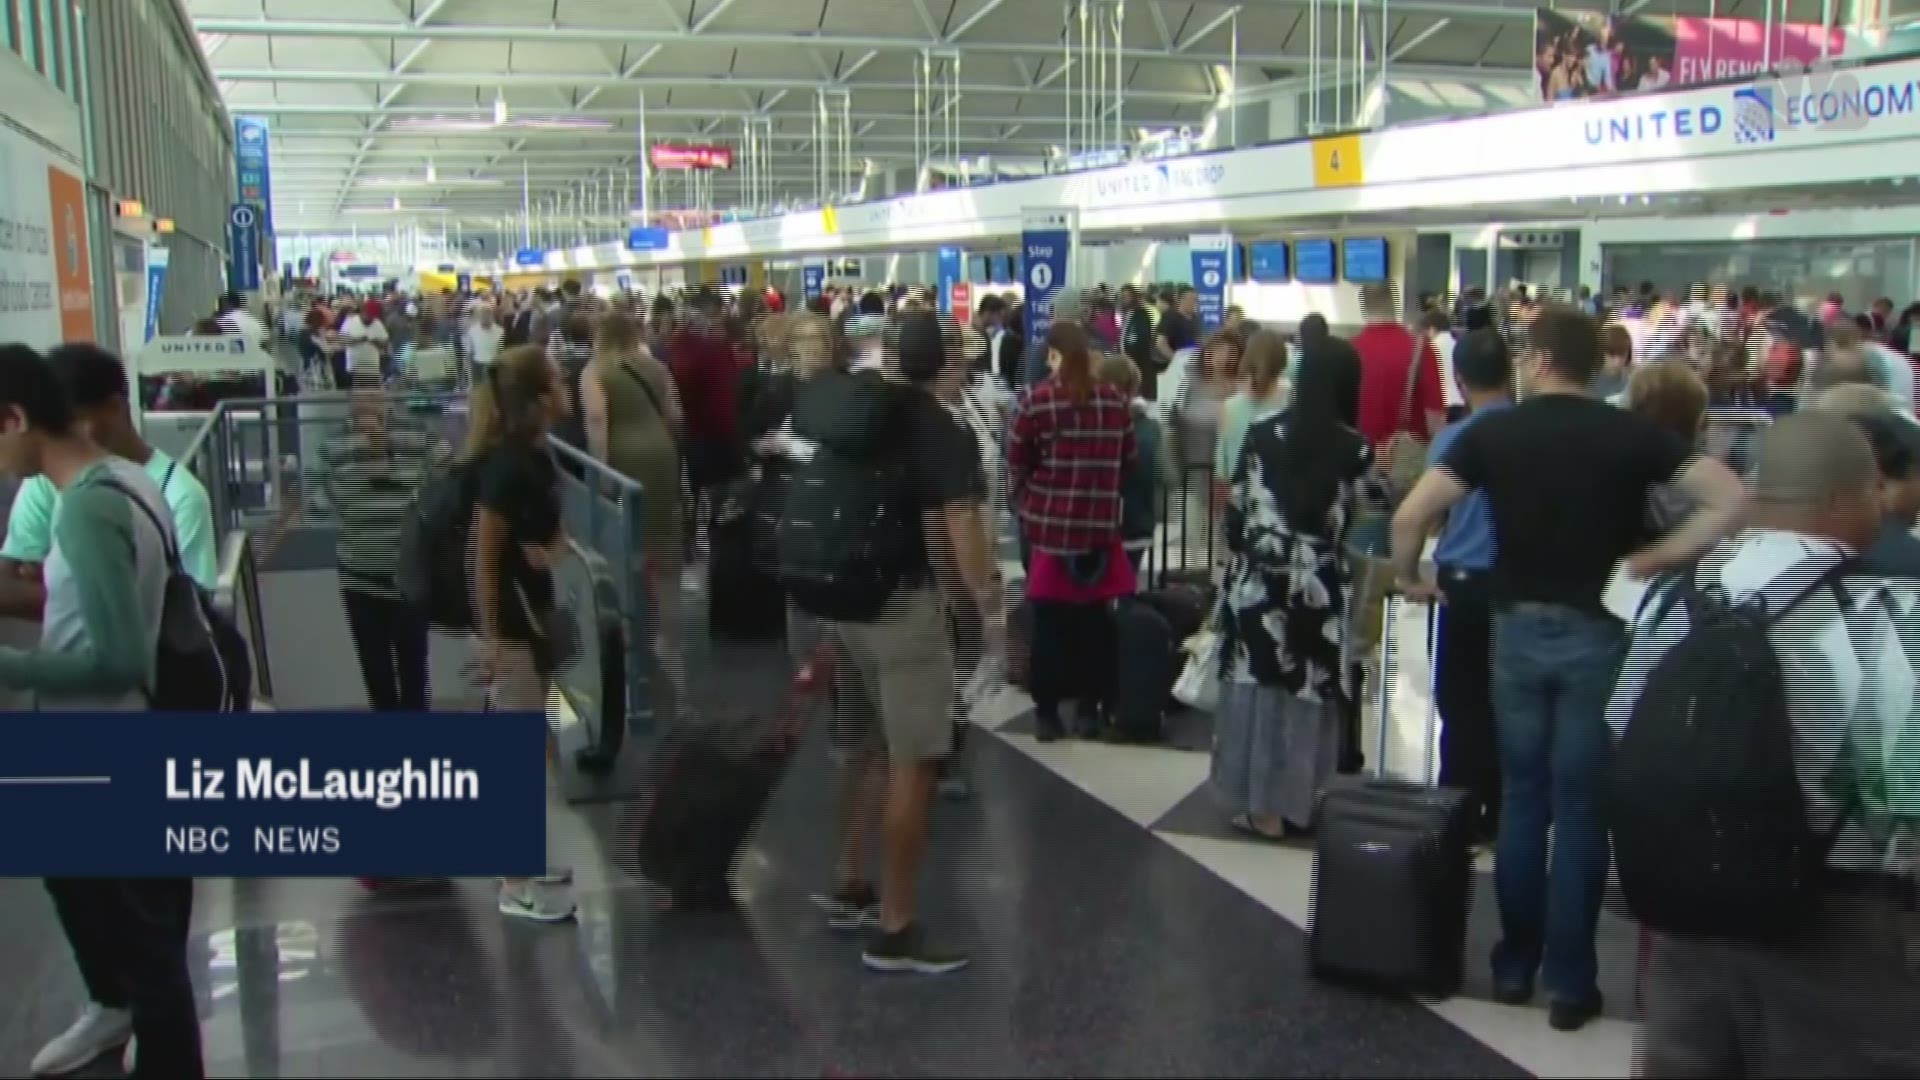 More people are putting off holiday travel planning this year, according to AirfareWatchdog. NBC's Liz McLaughlin reports on how to get the cheapest flight over the holiday season.